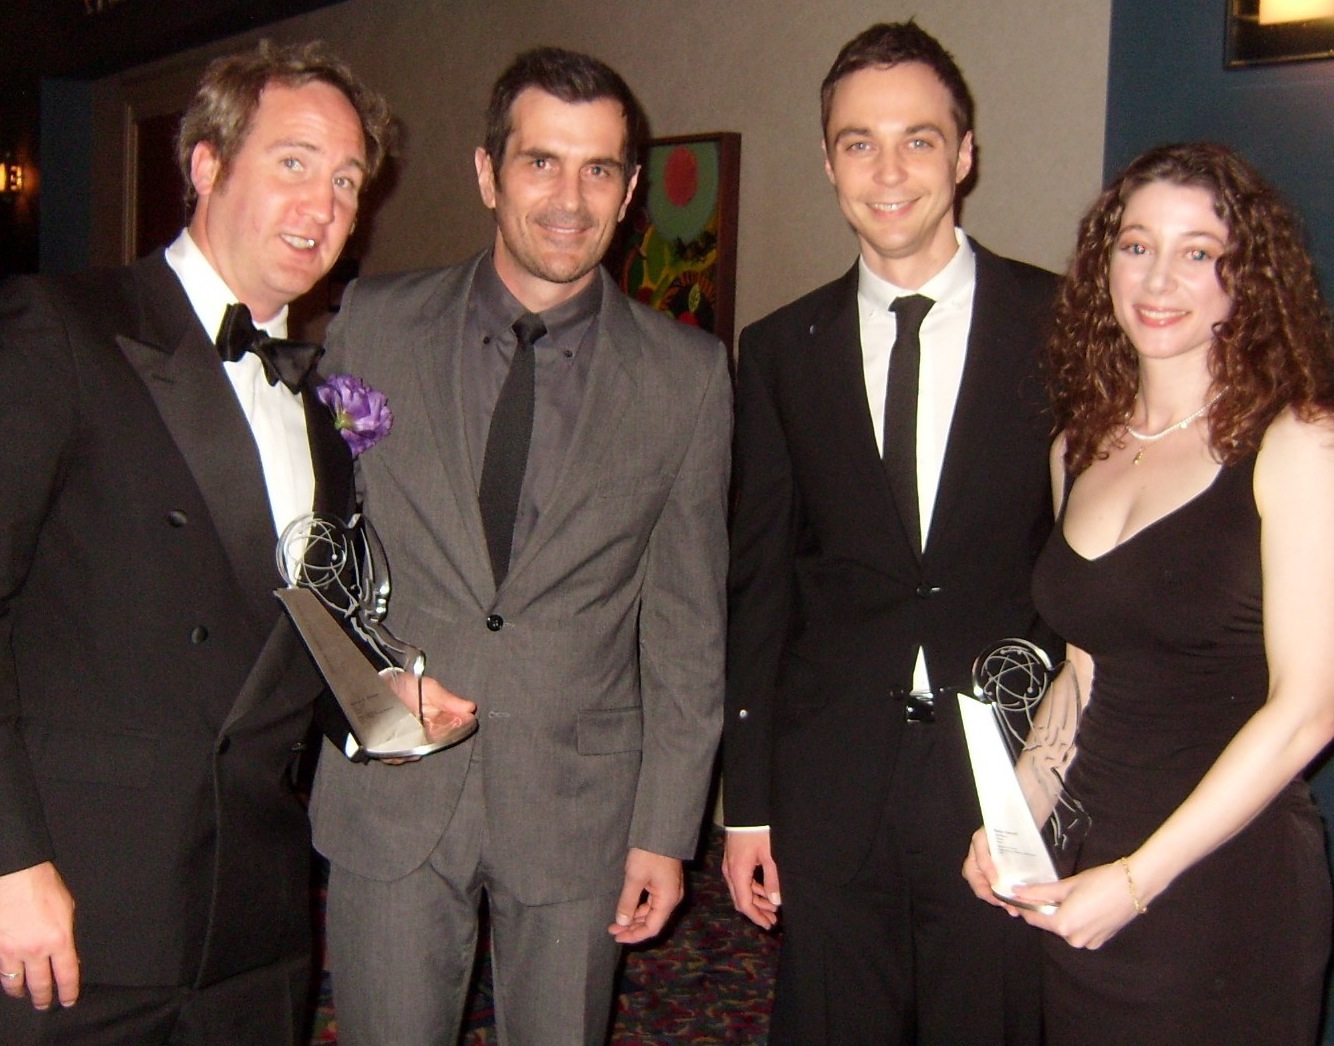 Nadia Hamzeh, Jim Parsons, Ty Burrell, George Dickson at the Emmys Academy of Television Arts & Sciences College Television Awards 2010